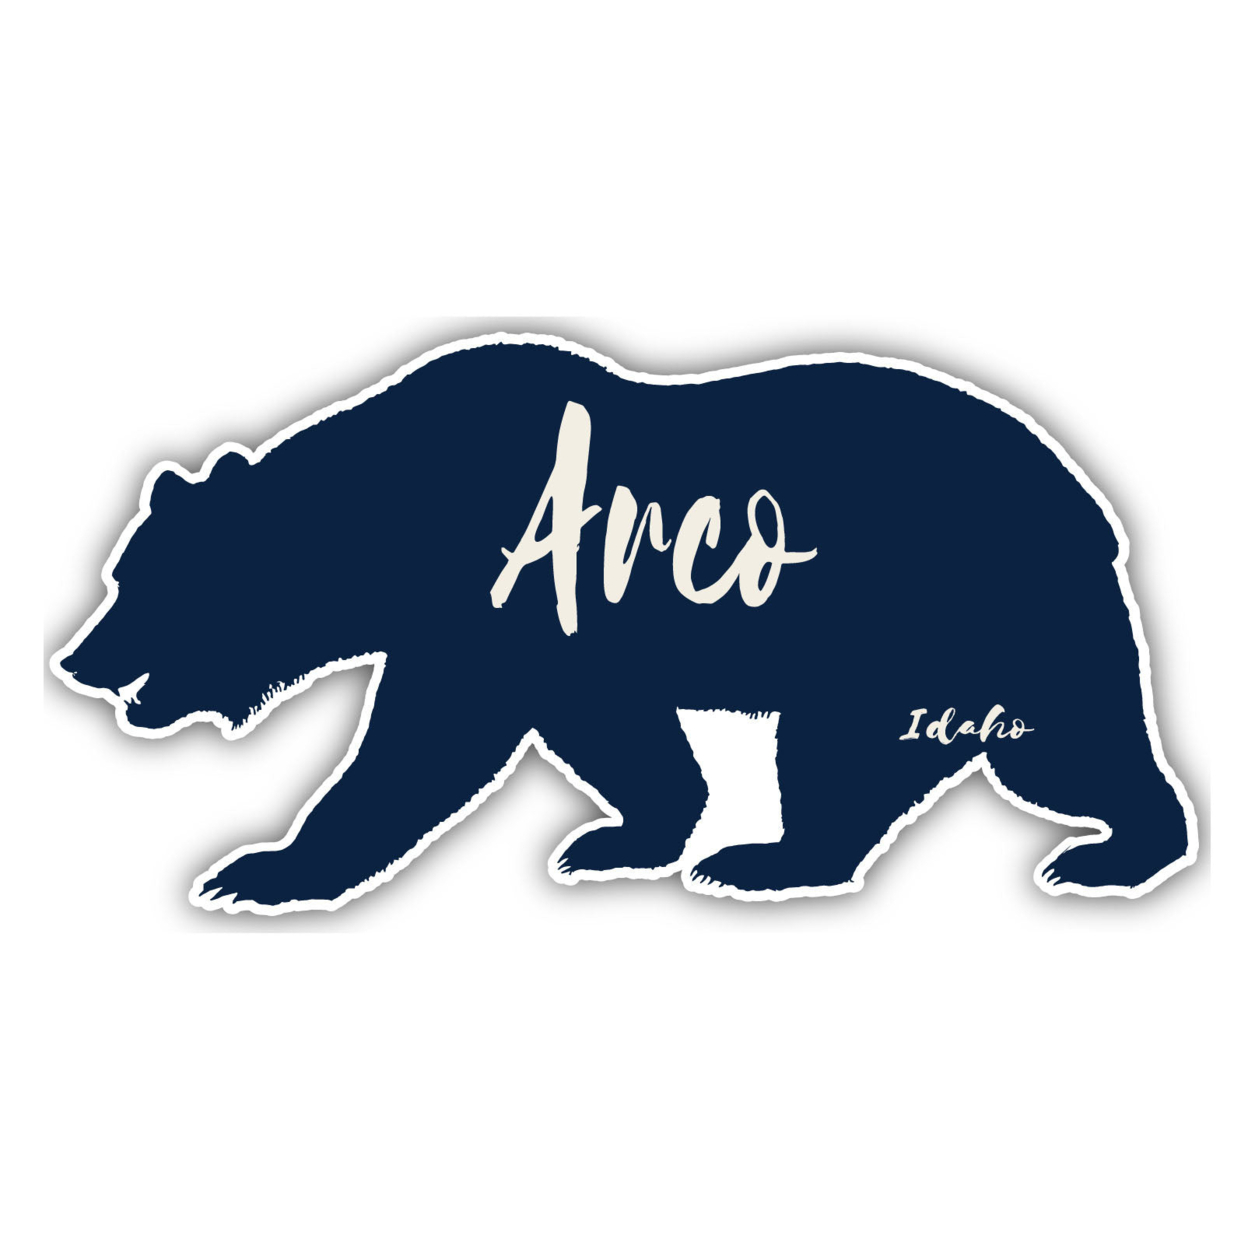 Arco Idaho Souvenir Decorative Stickers (Choose Theme And Size) - Single Unit, 2-Inch, Great Outdoors